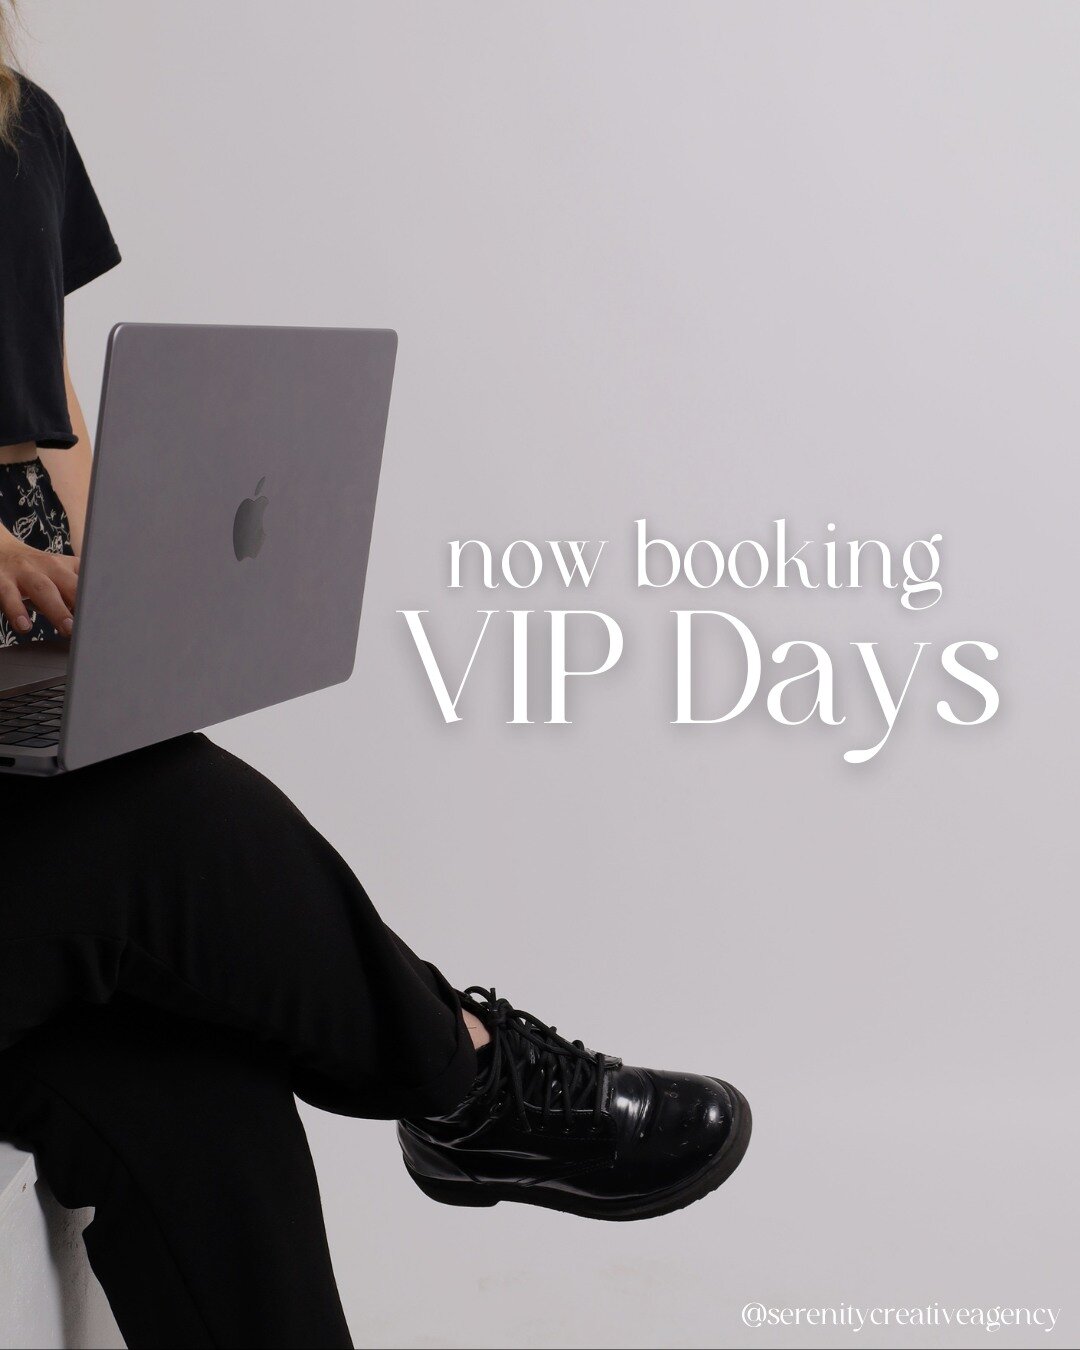 NOW BOOKING VIP DAYS 🤩🖤

Choose from 3 curated packages or let's make one that will best suit you &amp; your business!

With only 4 dates available...first come, first served. ✨

Questions? Inquiries? Ready to get going?! Fill out the contact form 